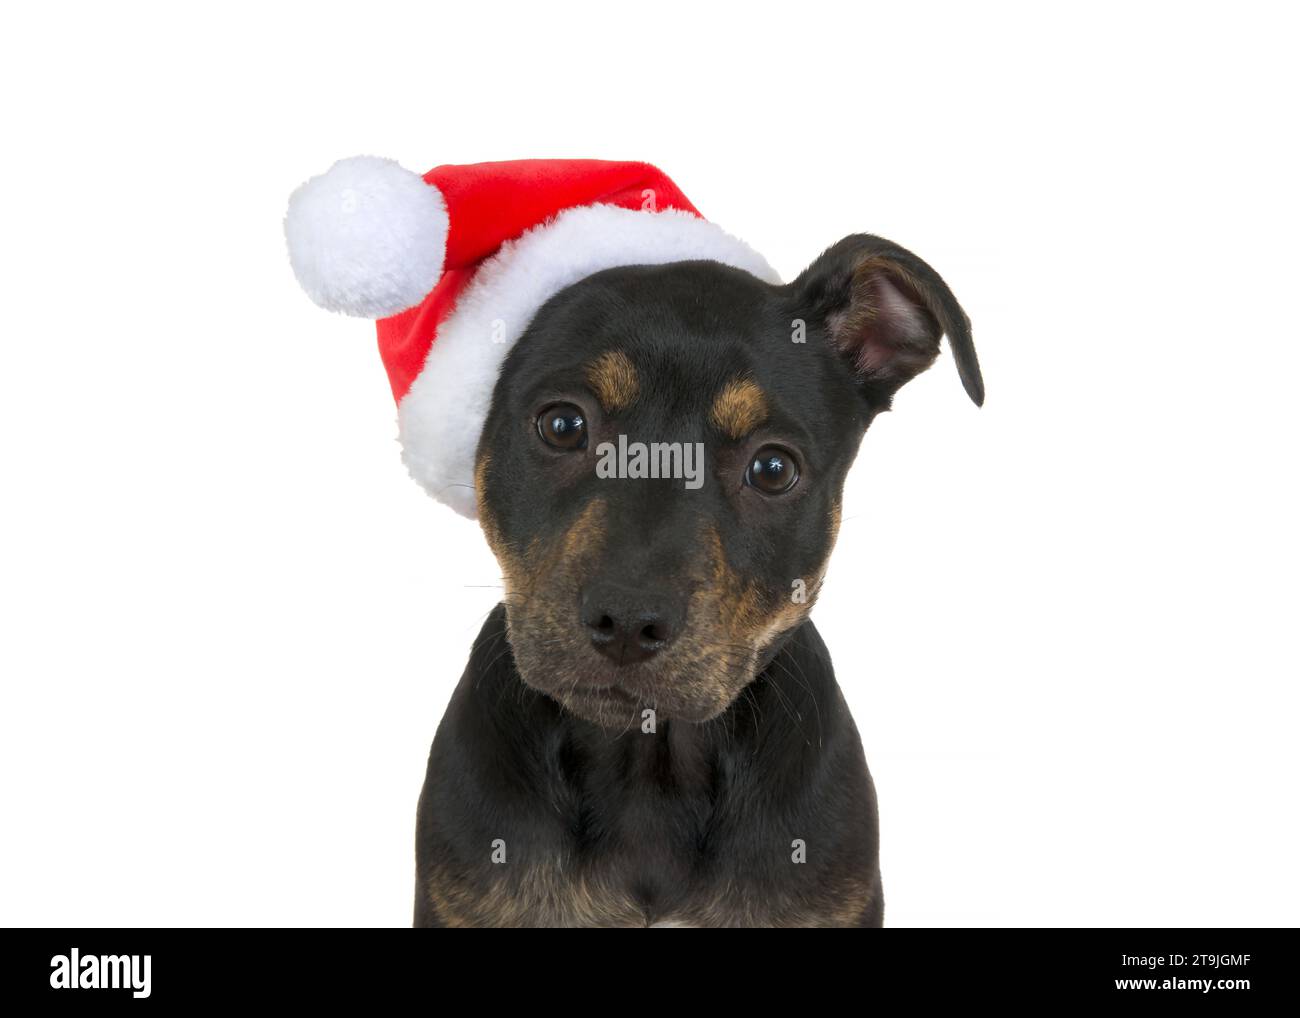 Close up portrait of a black and brown brindle American Staffordshire Terrier puppy wearing a Santa hat, isolated on white. Looking directly at viewer Stock Photo